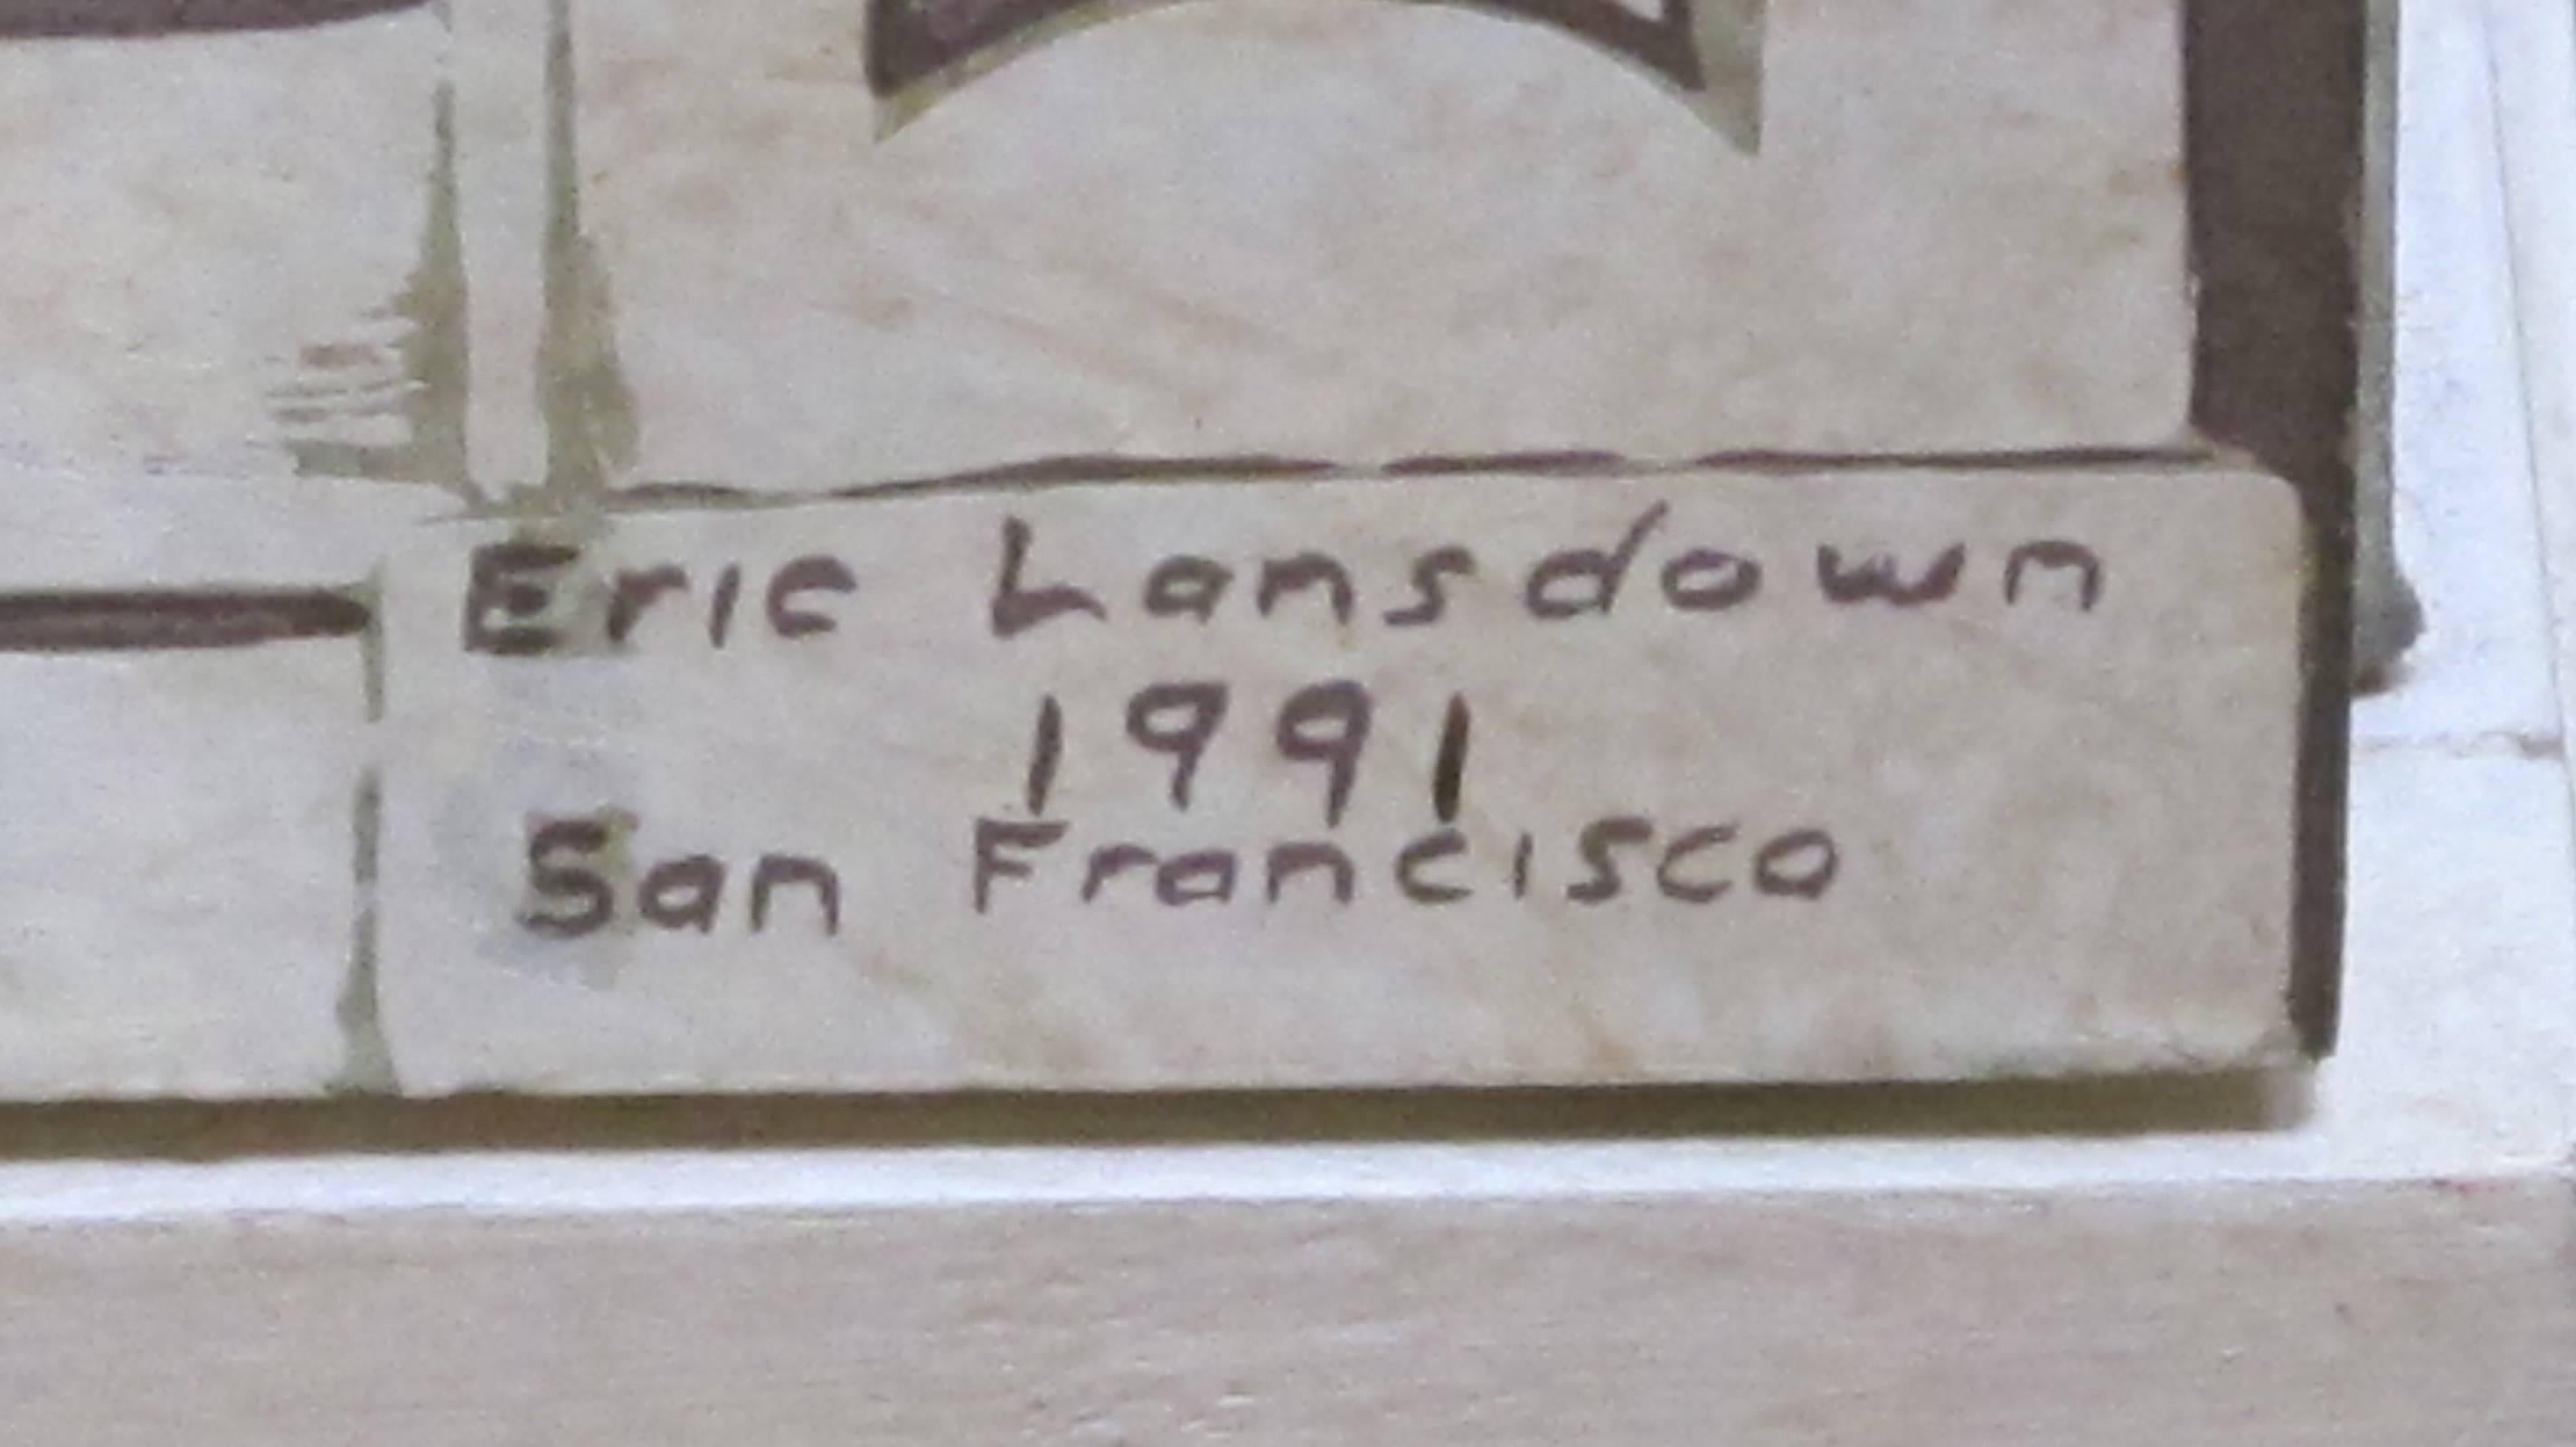 A rare and masterfully crafted wooden painted and silk-screened dollhouse or cabinet of a charming neoclassical 'Casa Piccola' by famed artisan Eric Lansdown; signed 'Eric Lansdown 1991 San Francisco'; with hinged facade fitted with glass windows